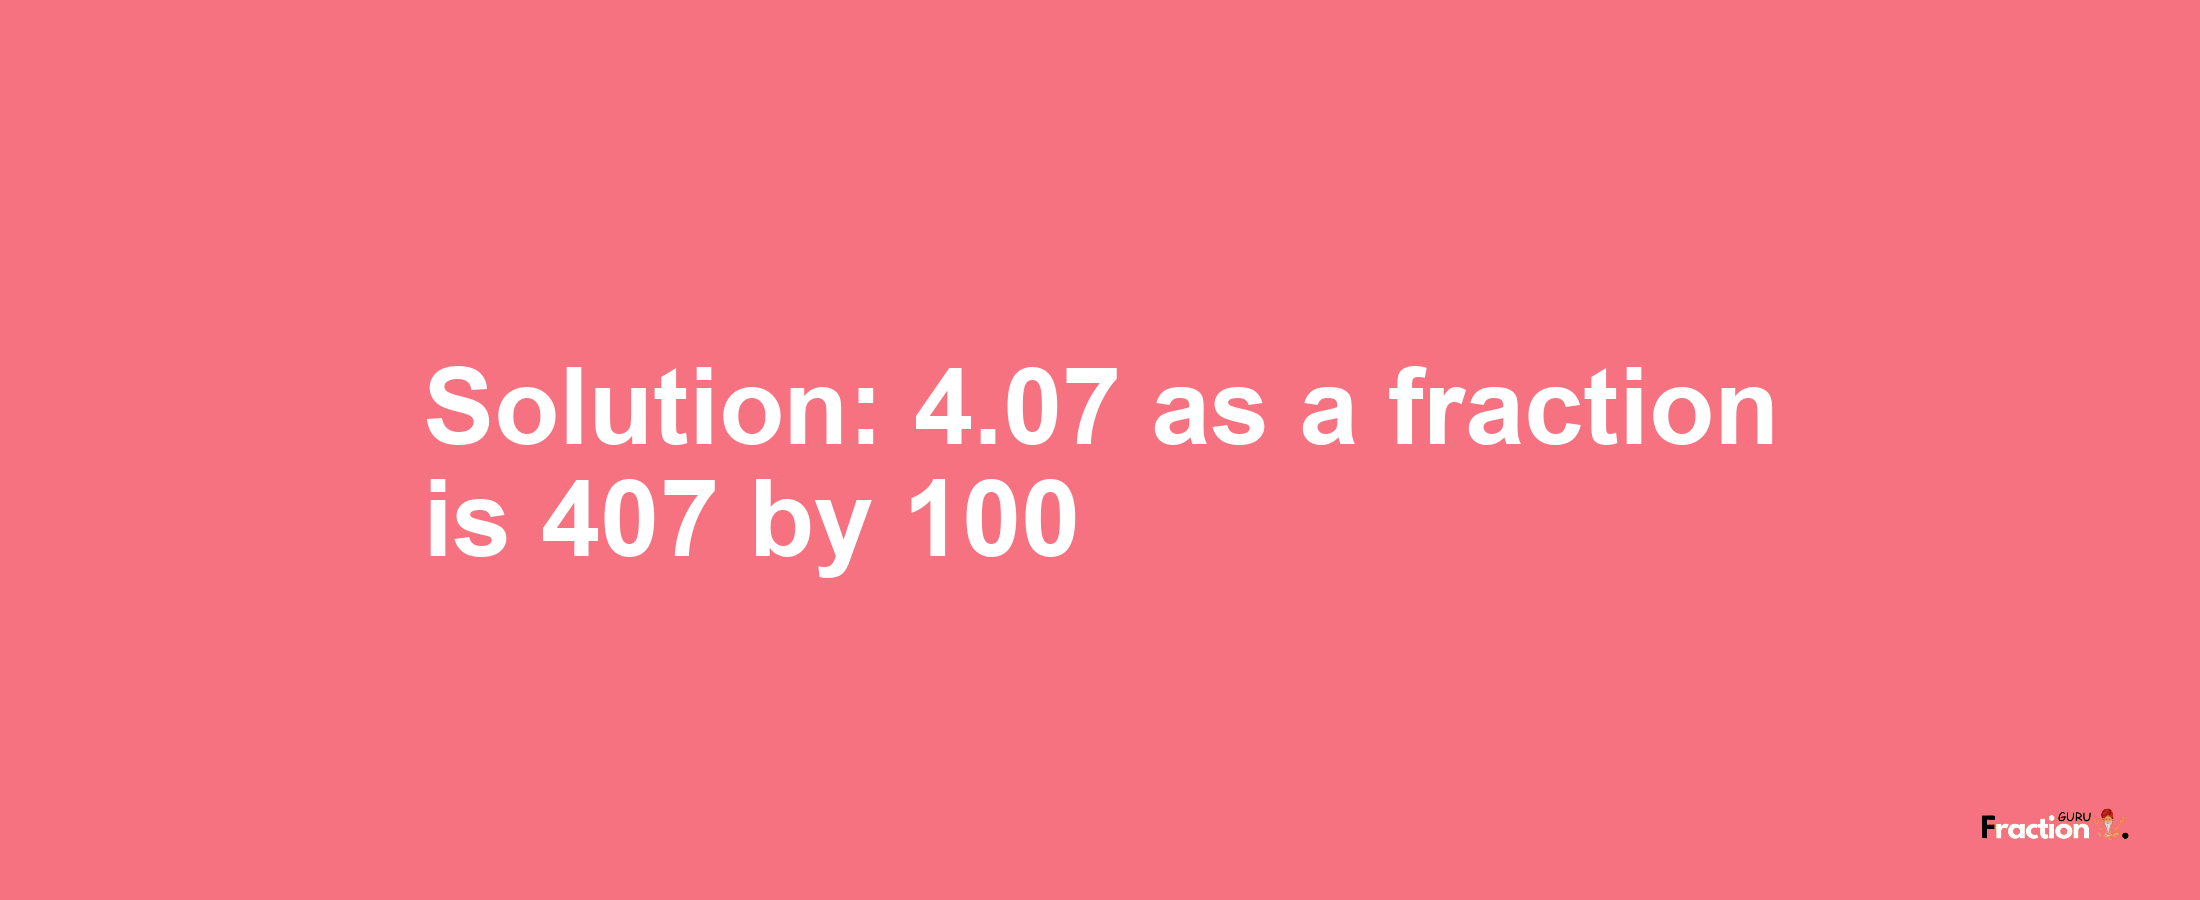 Solution:4.07 as a fraction is 407/100